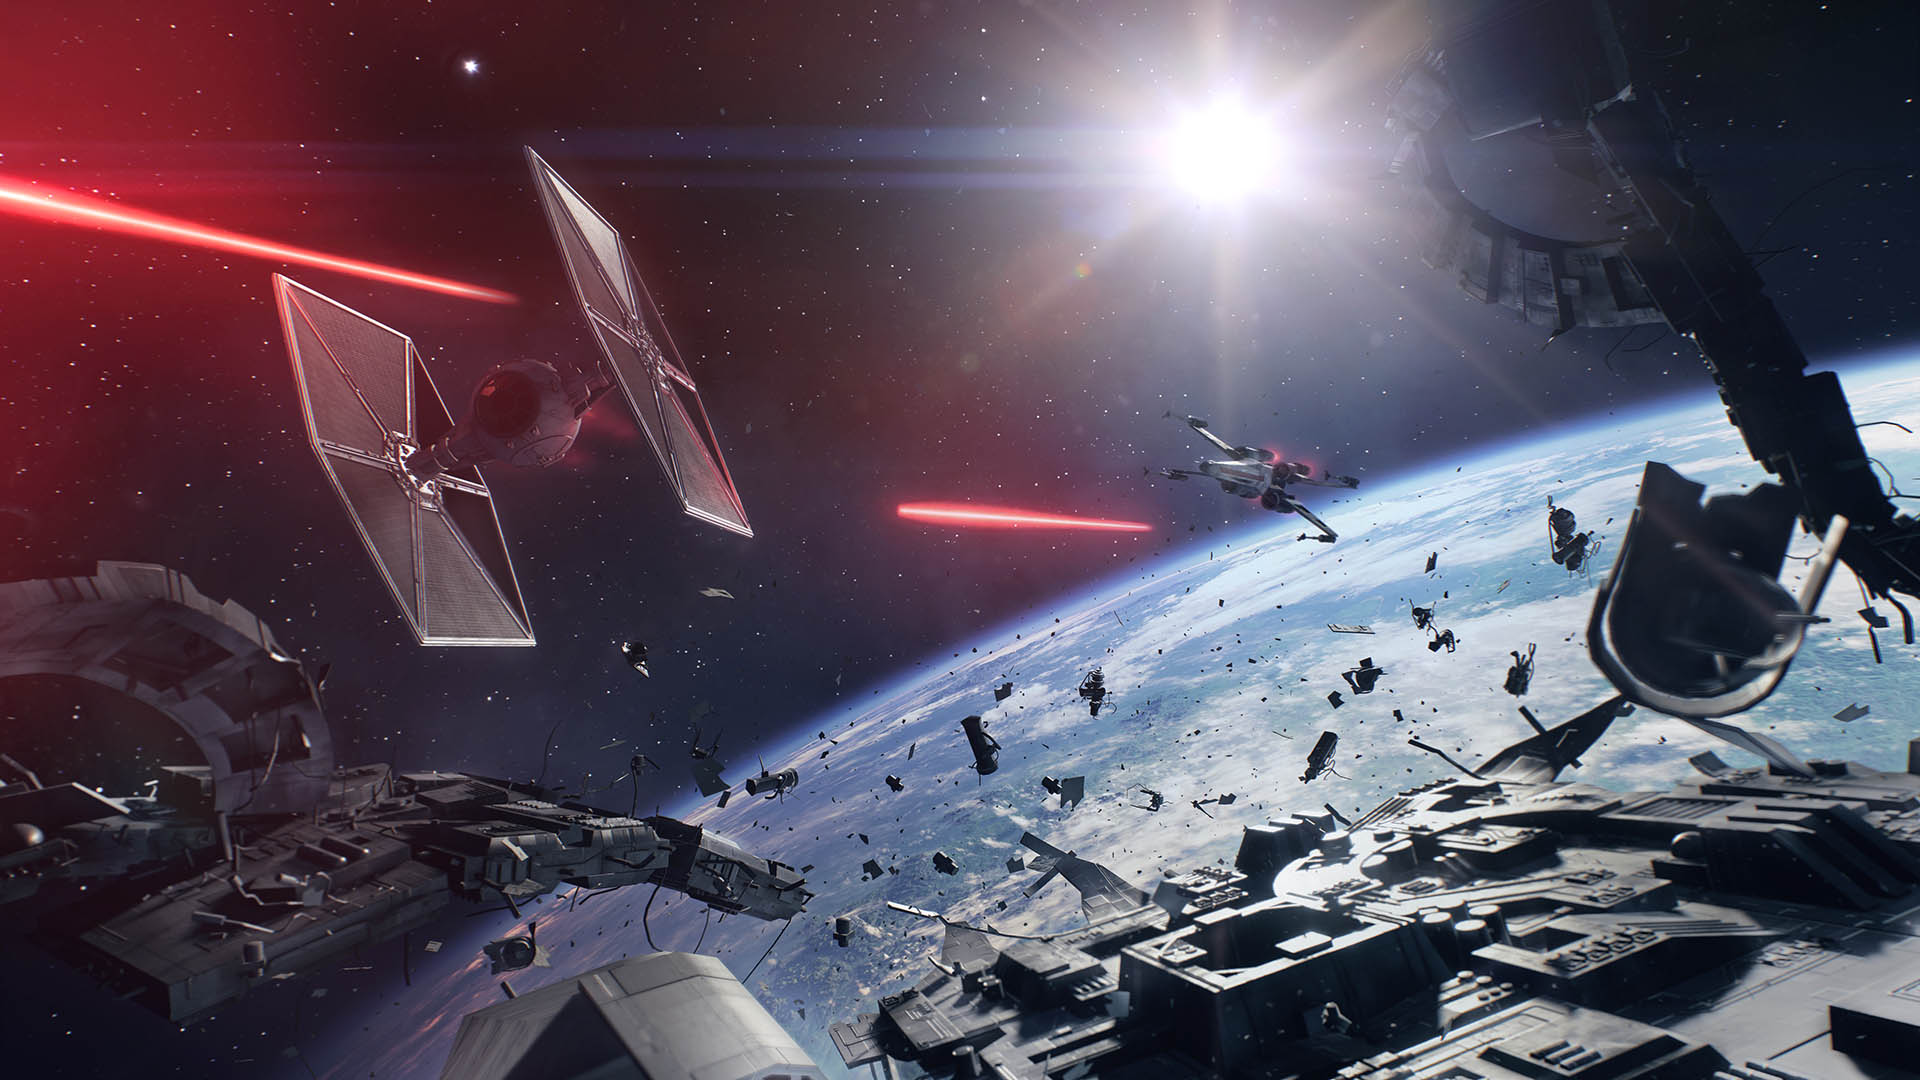 New Star Wars Battlefront II: Celebration Edition Launches on December 5 -  Jedi News